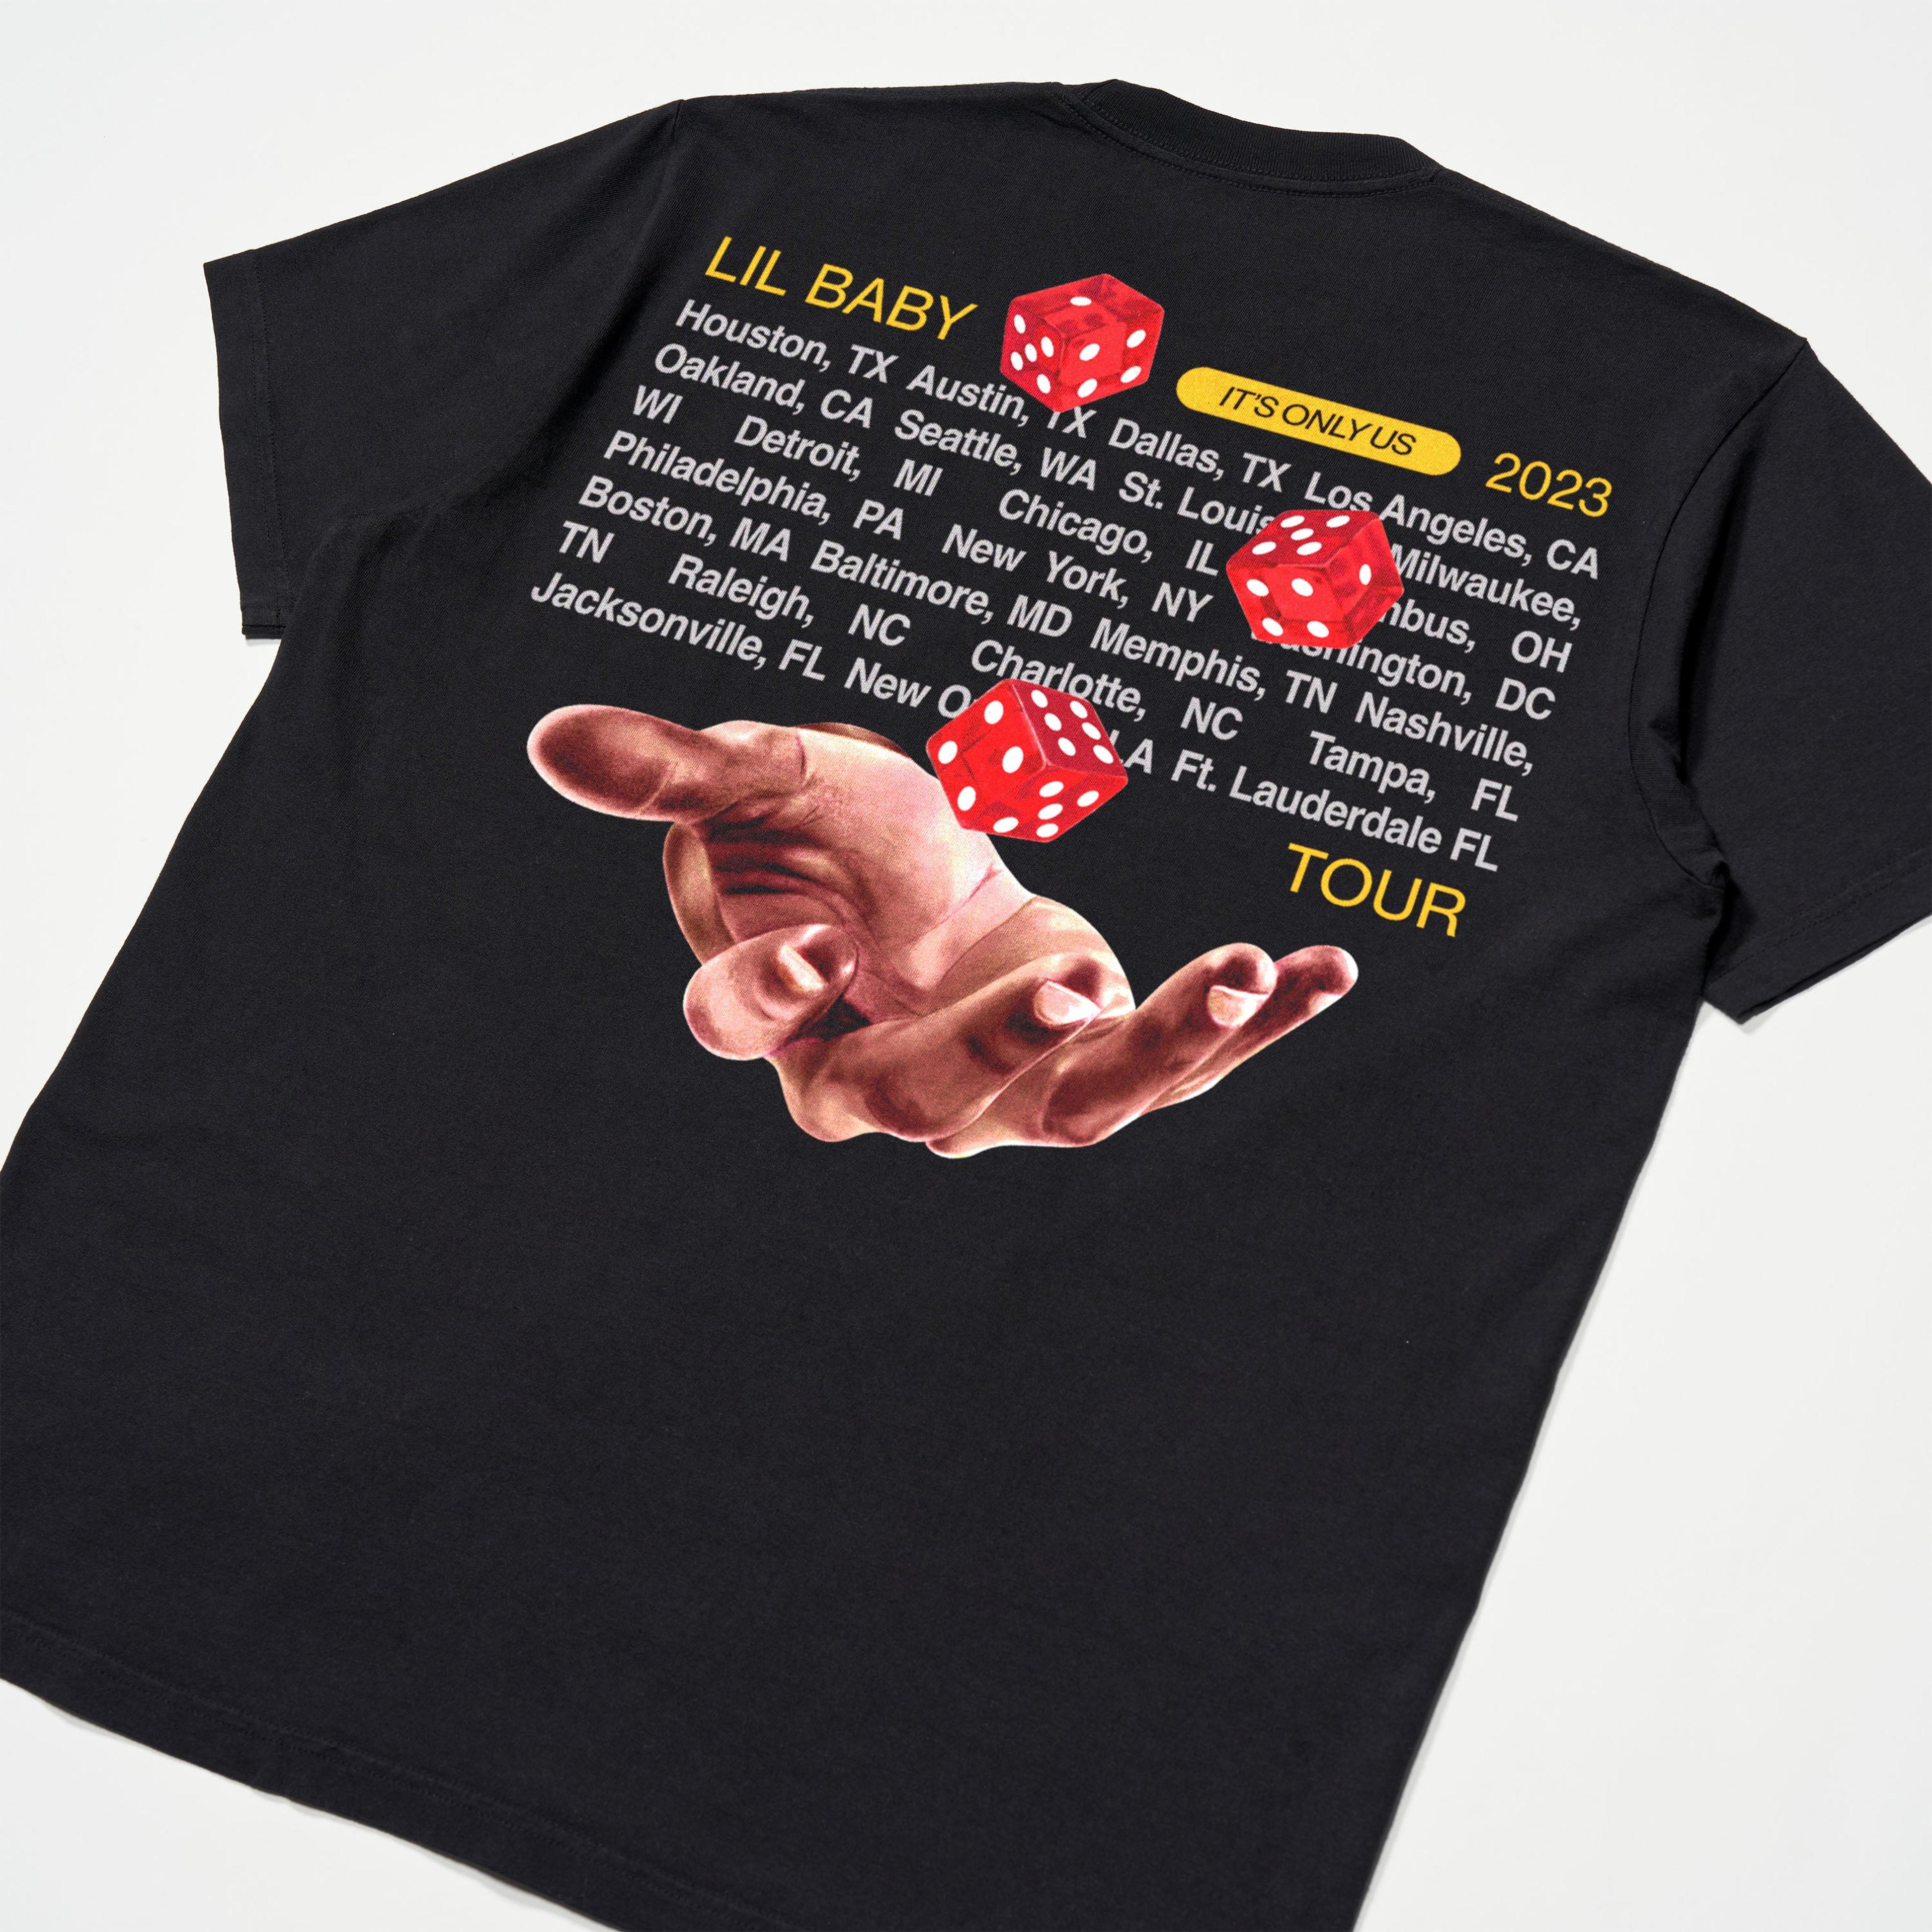 Alternate View 2 of Lil Baby IOU Tour Life is a Gamble Tee - Black (NTWRK Exclusive)